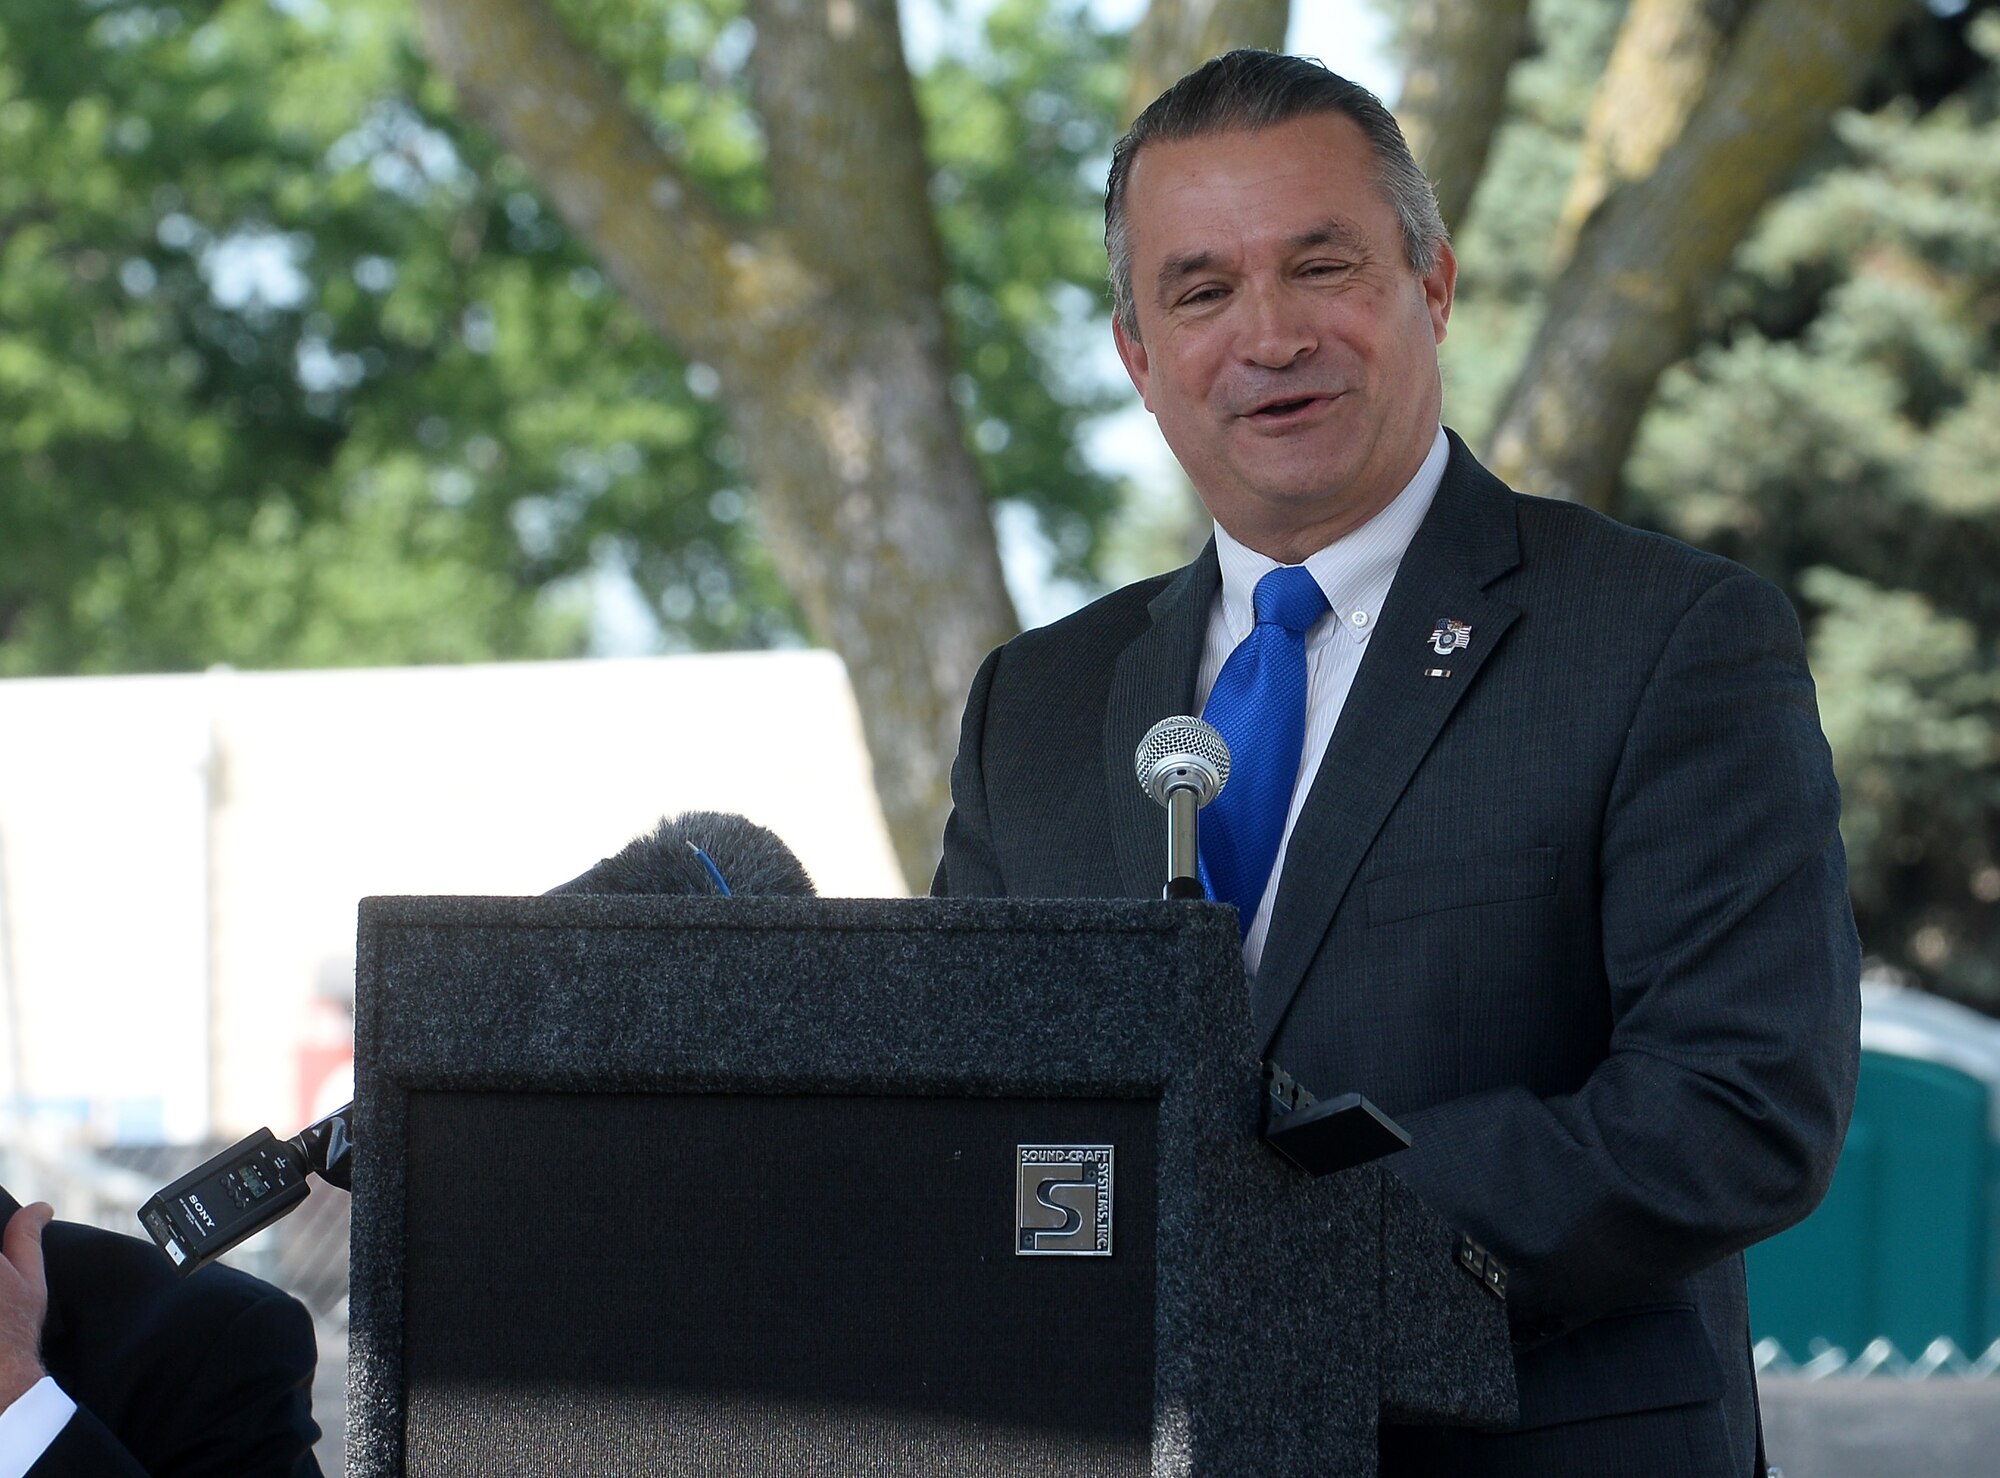 Don Bacon, United States Congressman, speaks to a crowd during a groundbreaking ceremony for the Fisher House project at the Veteran Affairs Medical Center in Omaha, Nebraska, Aug. 7, 2019. Fisher Houses offer  free temporary lodging so military and veteran families can remain together while their loves ones receive specialized medical care at military and VA medical centers.